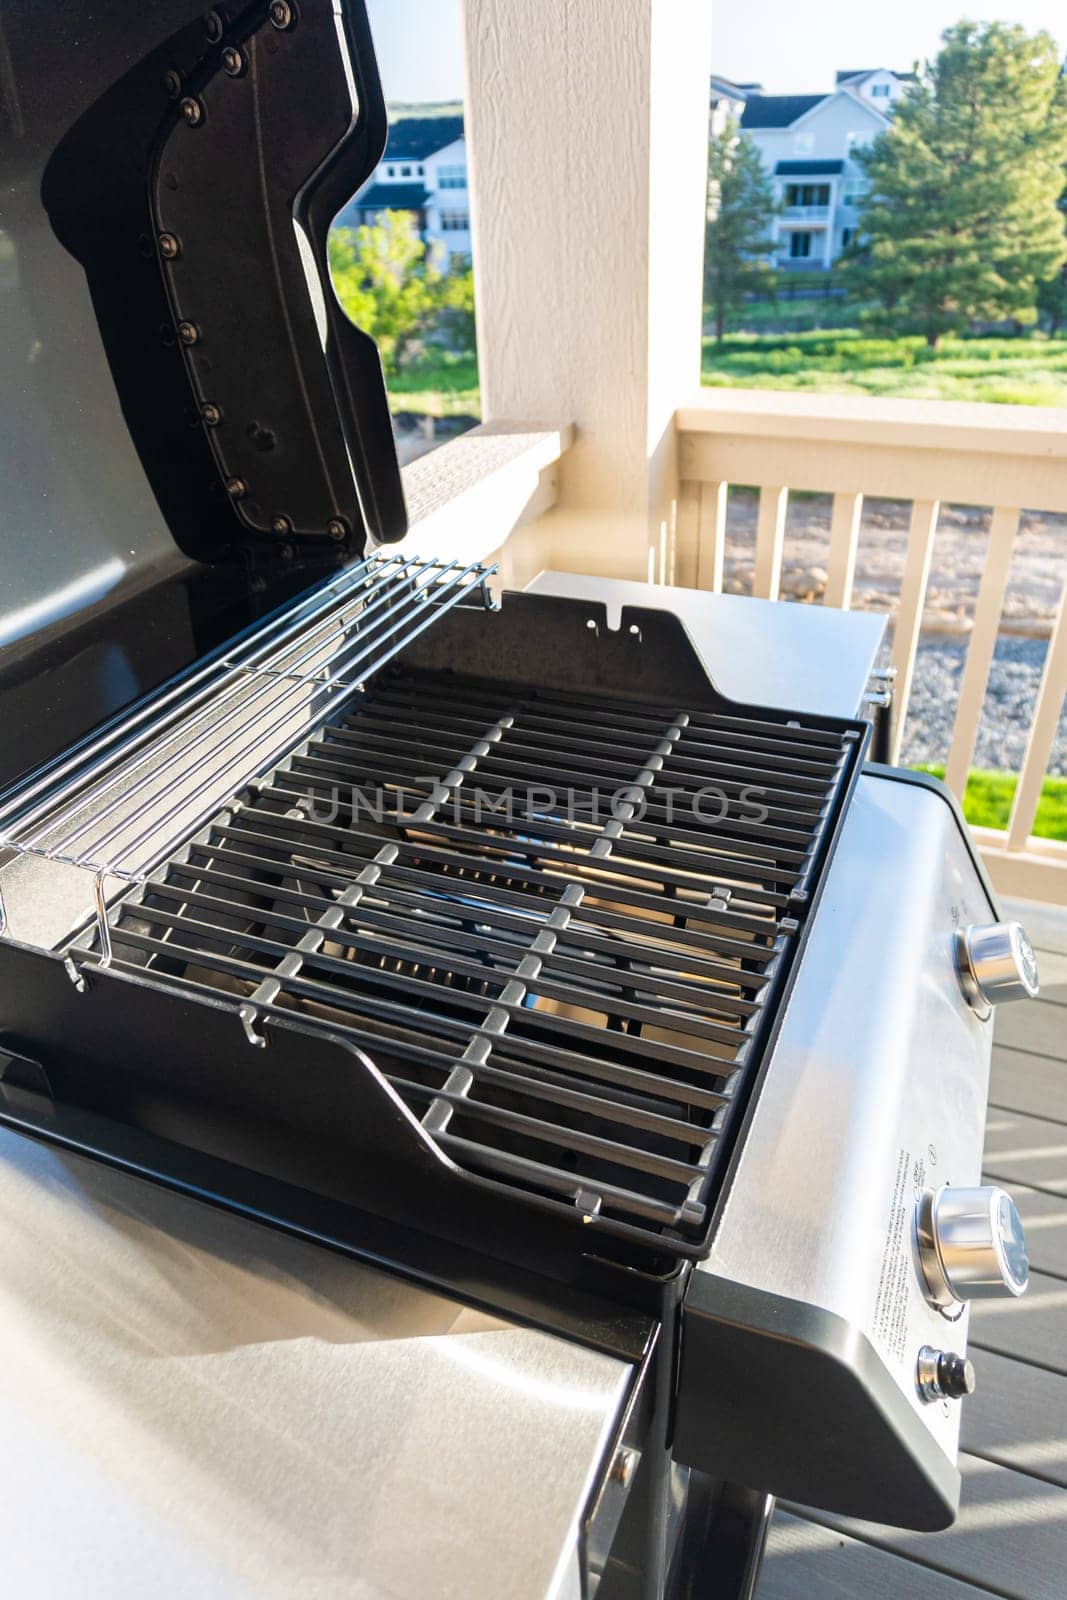 Sleek, open-lid, two-burner grill stands ready for use, conveniently positioned on the balcony of a suburban home, promising a delightful alfresco cooking experience.